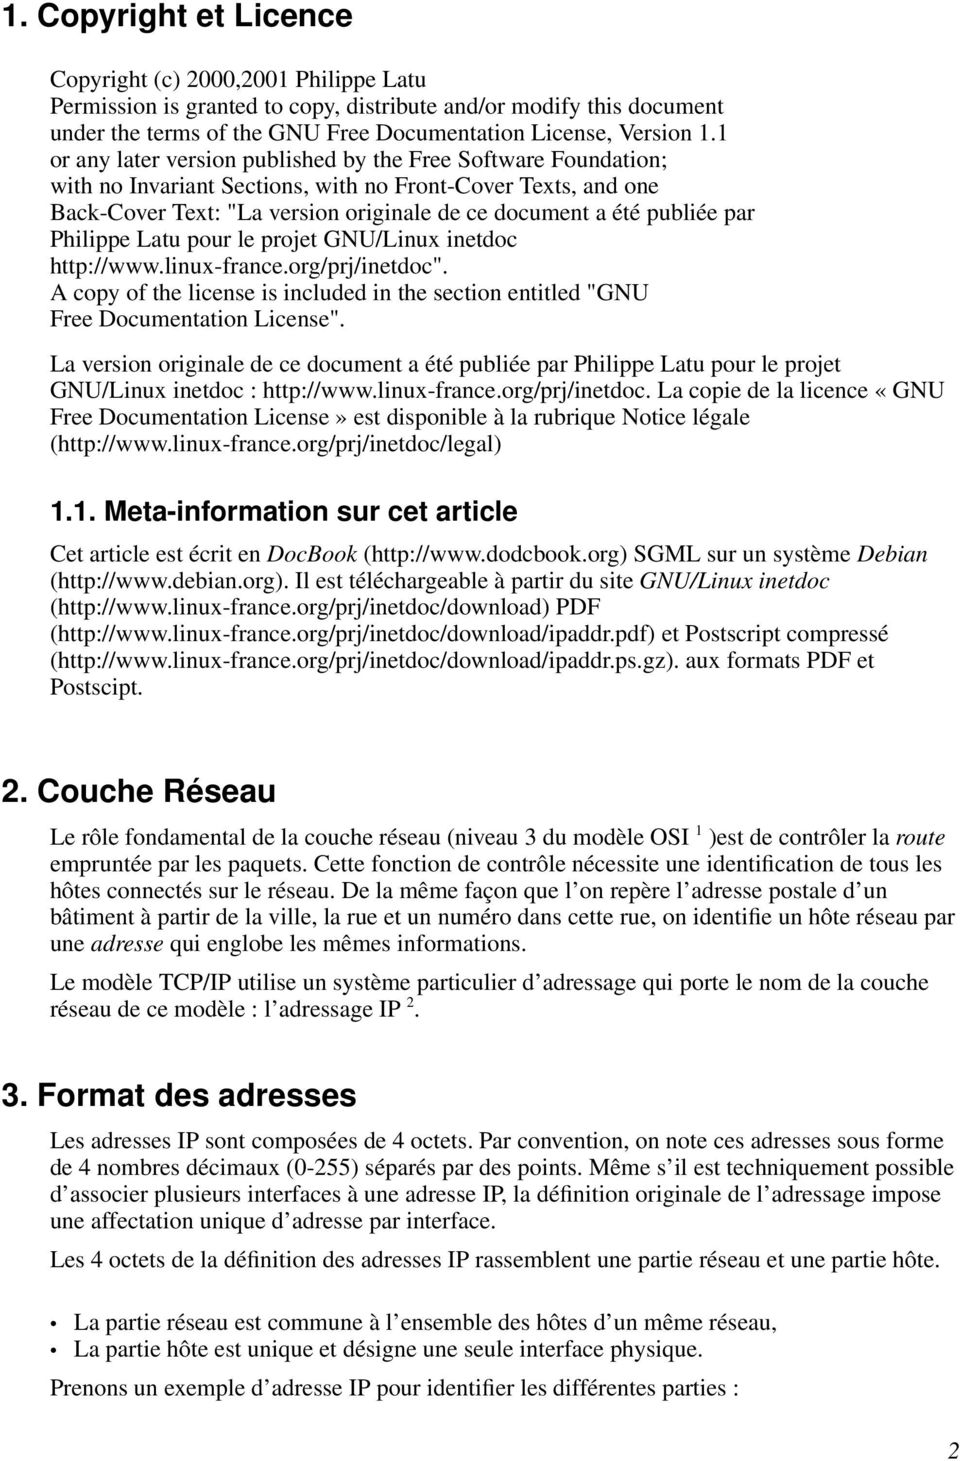 par Philippe Latu pour le projet GNU/Linux inetdoc http://www.linux-france.org/prj/inetdoc". A copy of the license is included in the section entitled "GNU Free Documentation License".